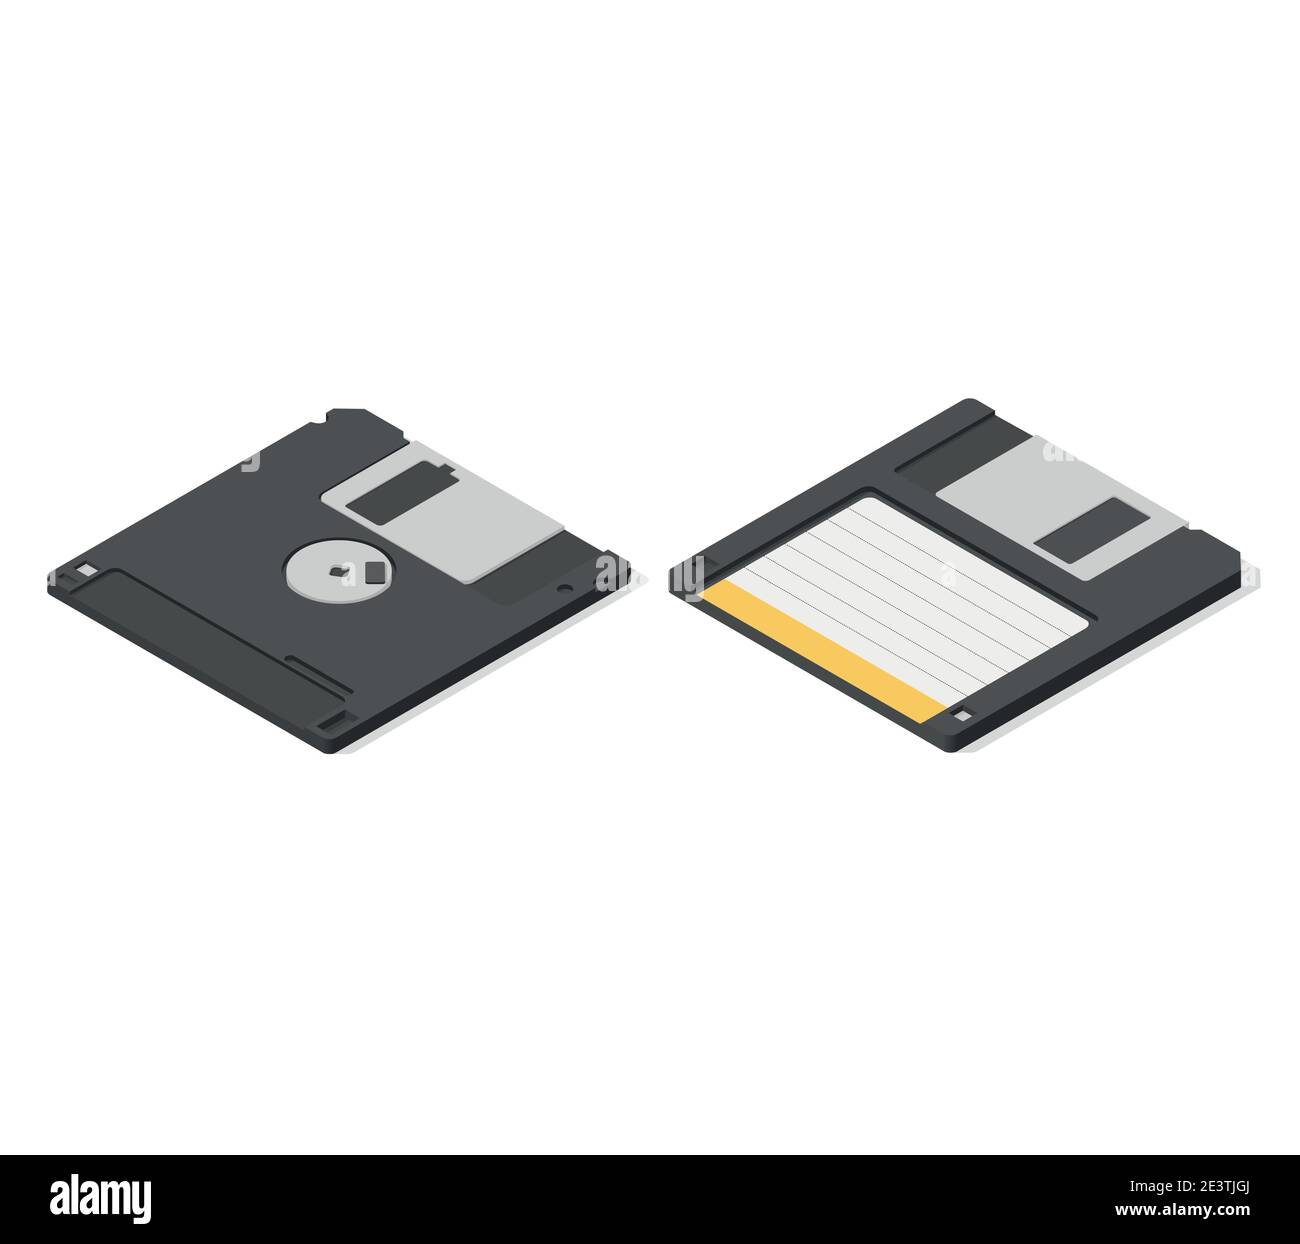 2 sides of an old technology floppy disc isolated on white background. Data storage vector illustration in isometric 3D style. Stock Vector